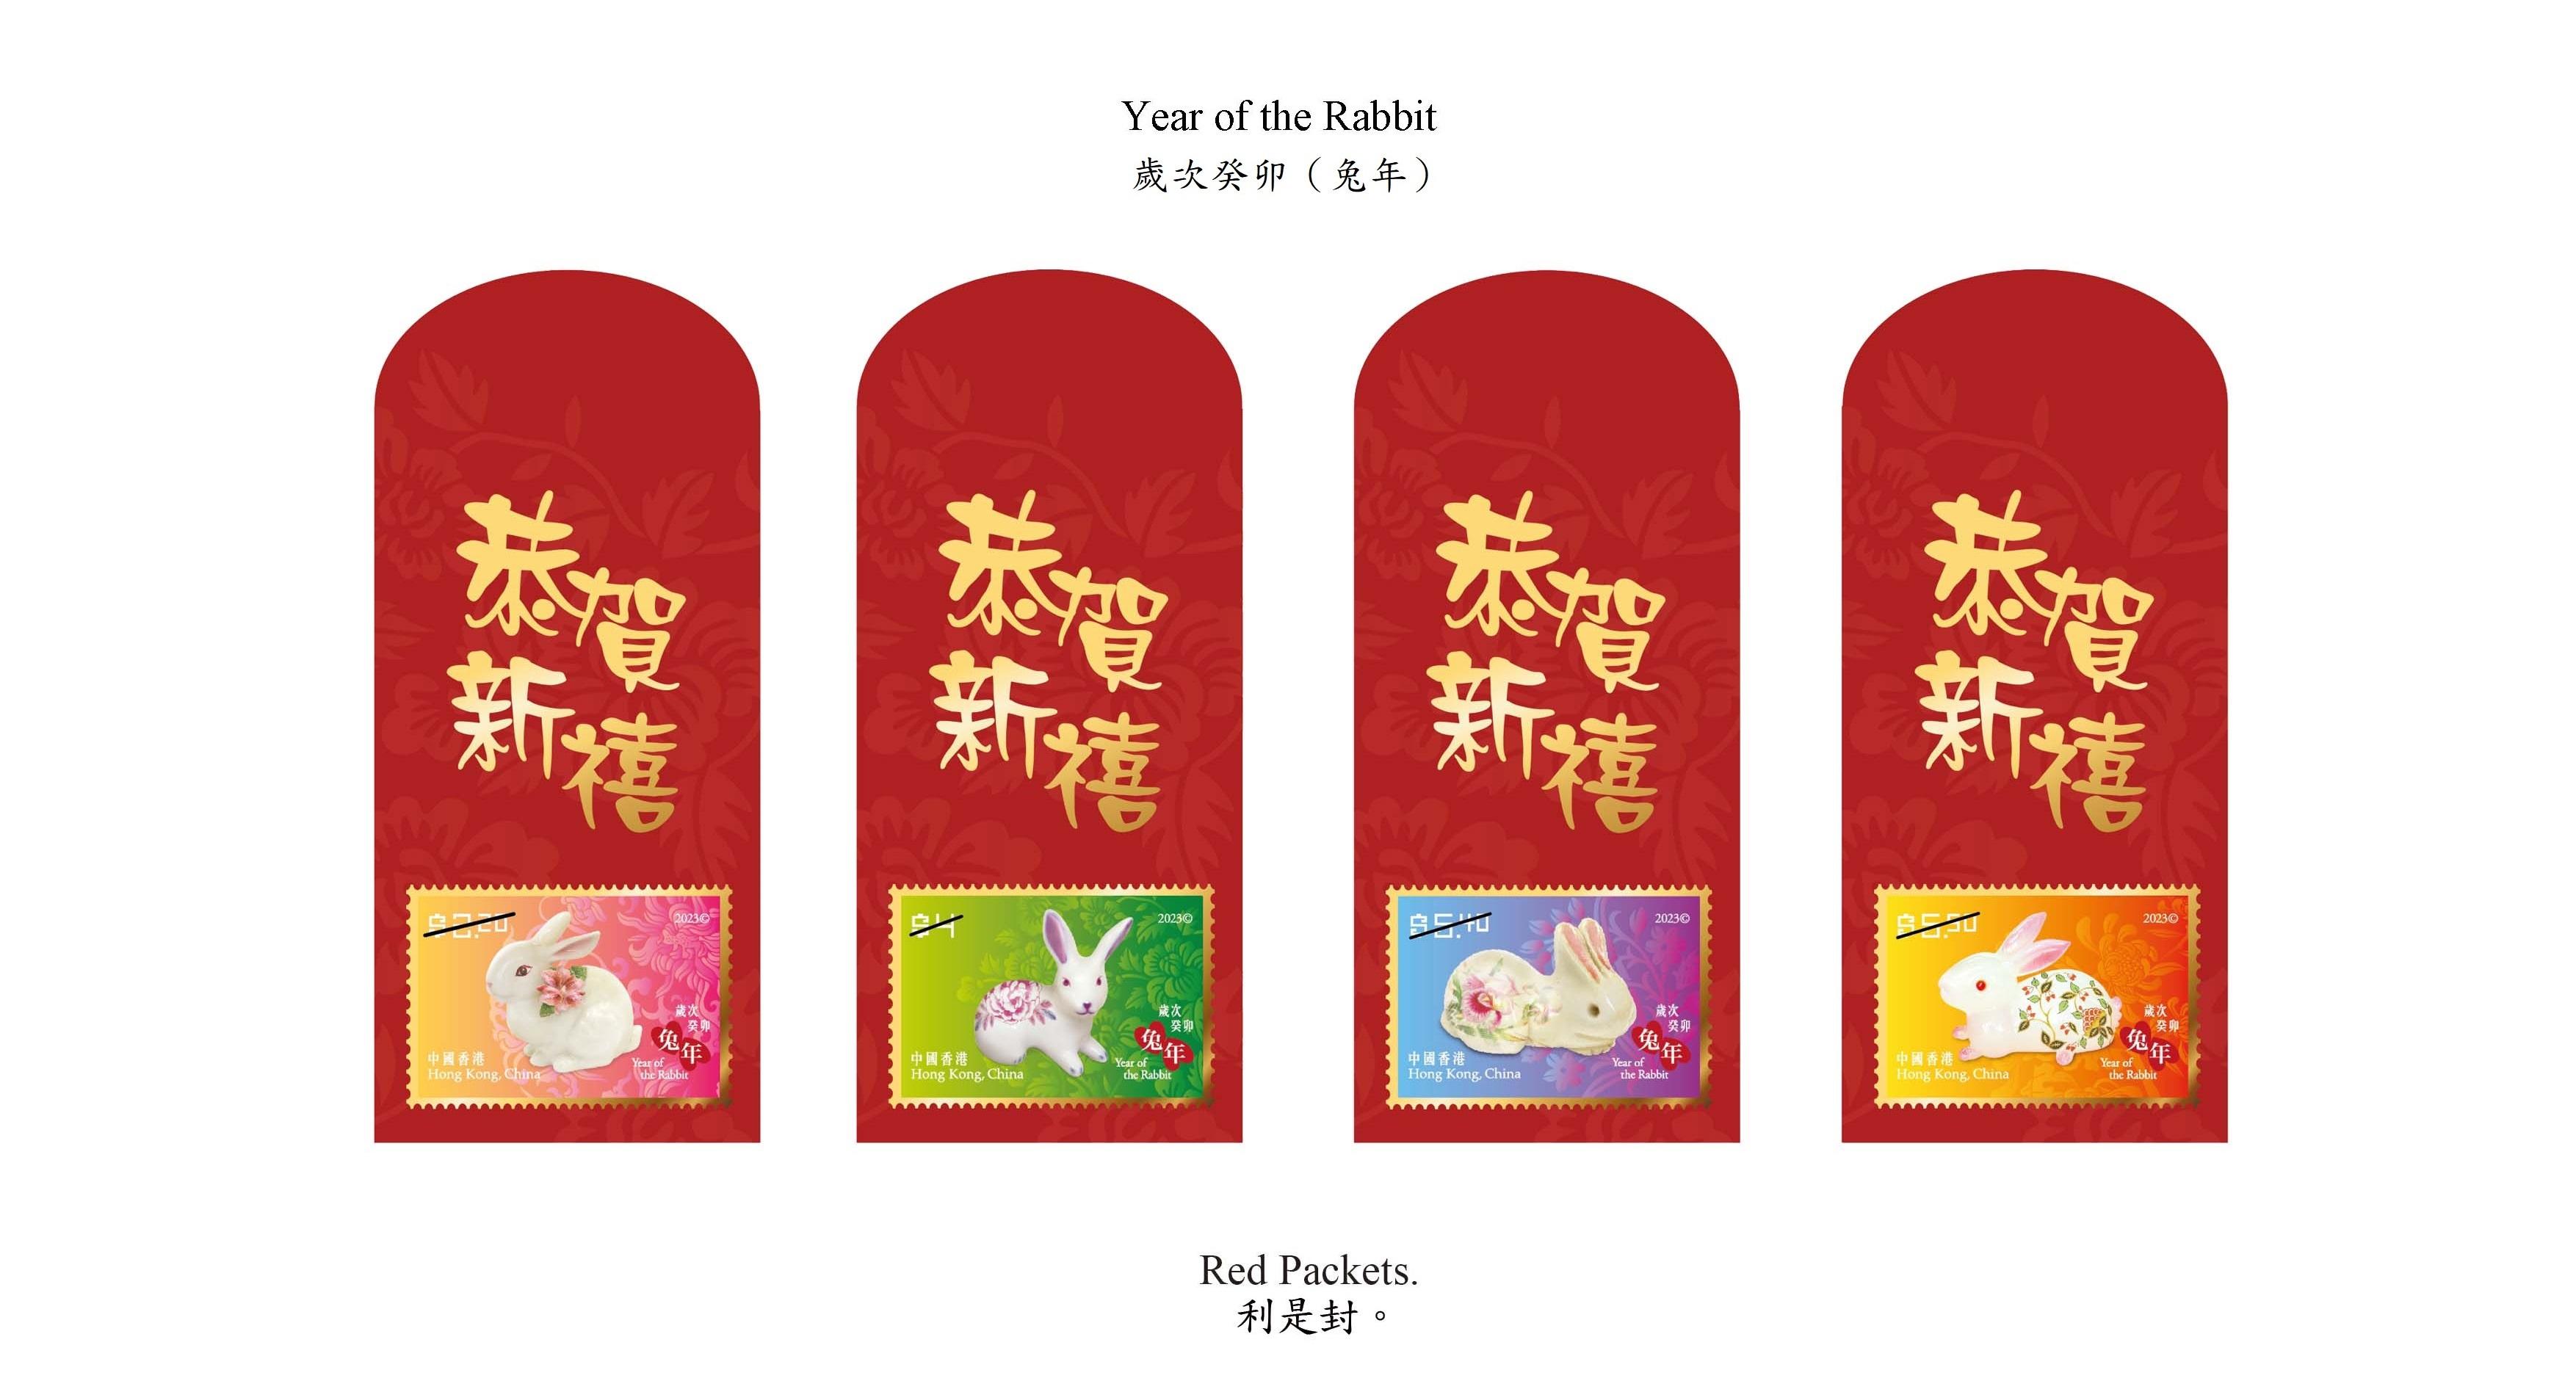 Hongkong Post will launch a special stamp issue and associated philatelic products with the theme "Year of the Rabbit" on January 10, 2023 (Tuesday). Photo shows the red packets.
